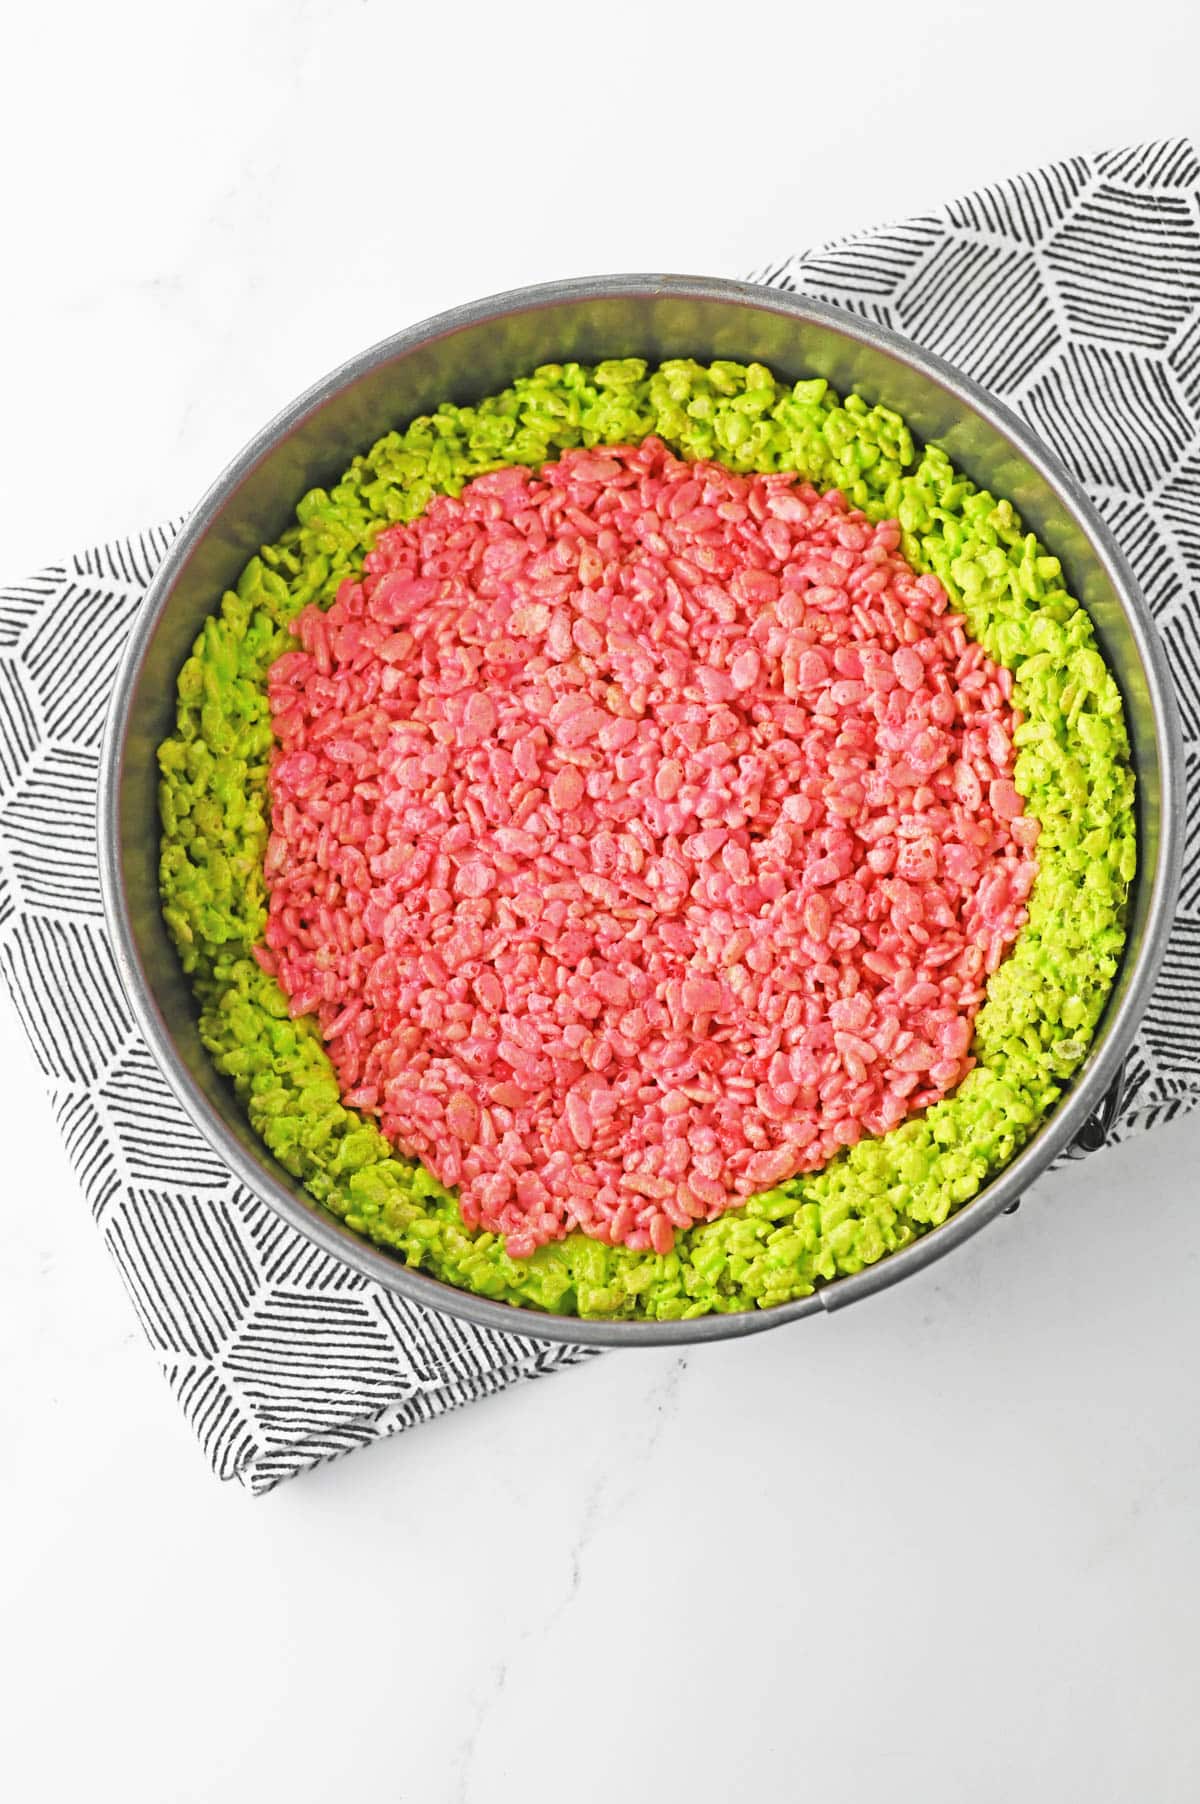 Red rice krispie mixture added to center of pan with green krispie treats